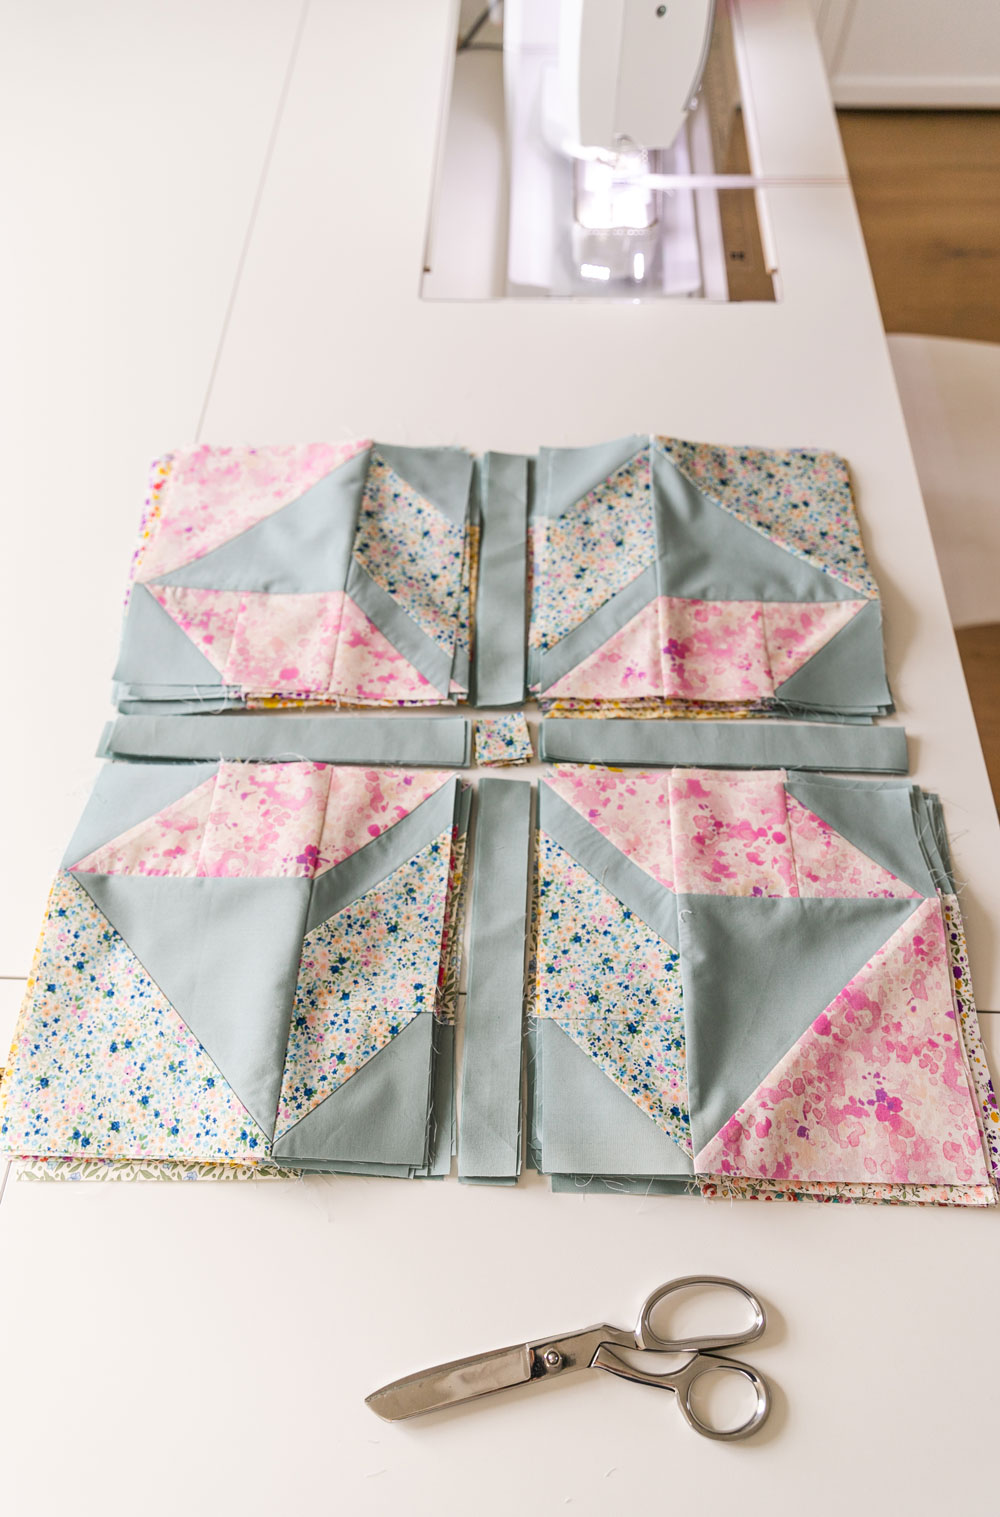 In Weeks 4 and 5 of the Holiday Party sew along we assemble our quilt blocks. Check out these extra tips and troubleshooting help! suzyquilts.com #sewalong #quilt